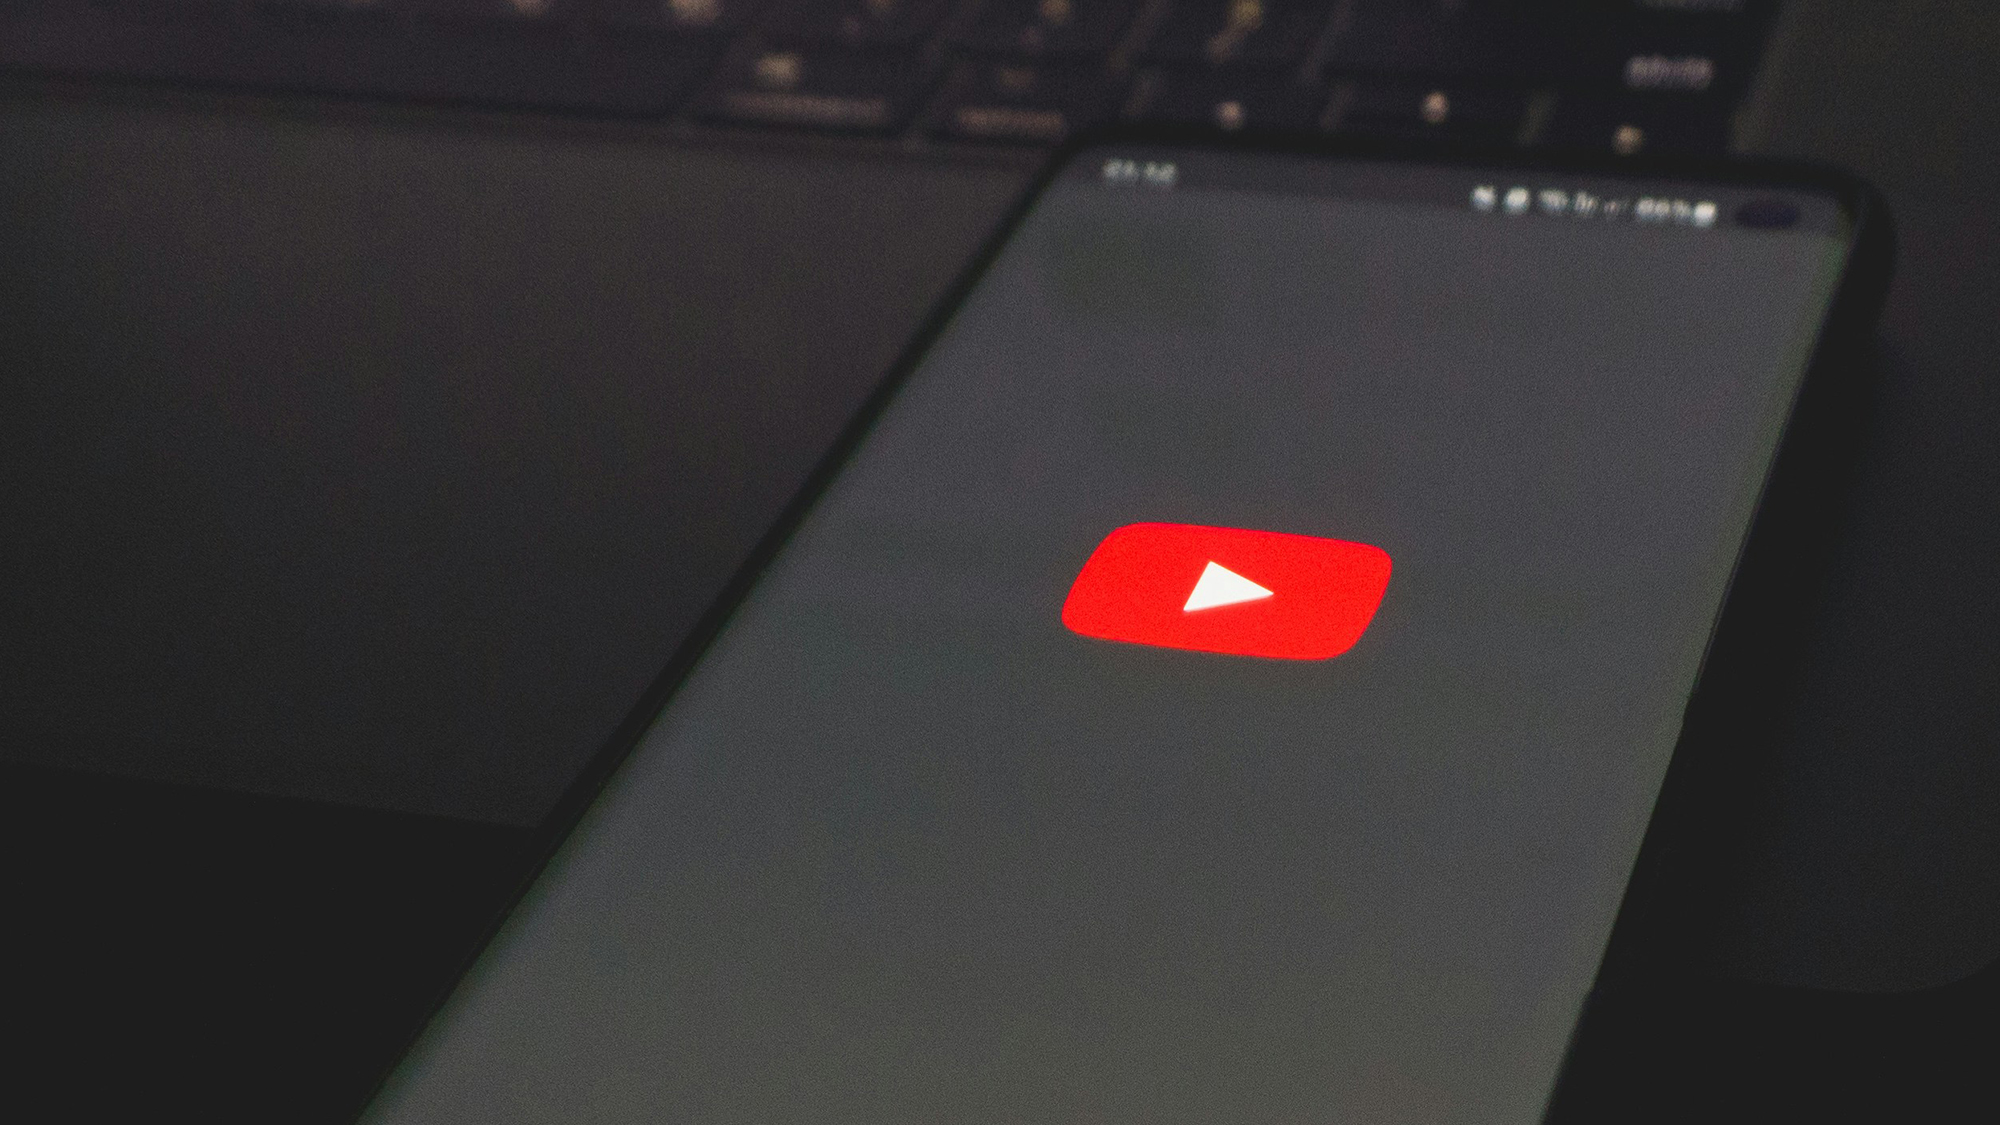 Ambient mode offers another way to watch YouTube.